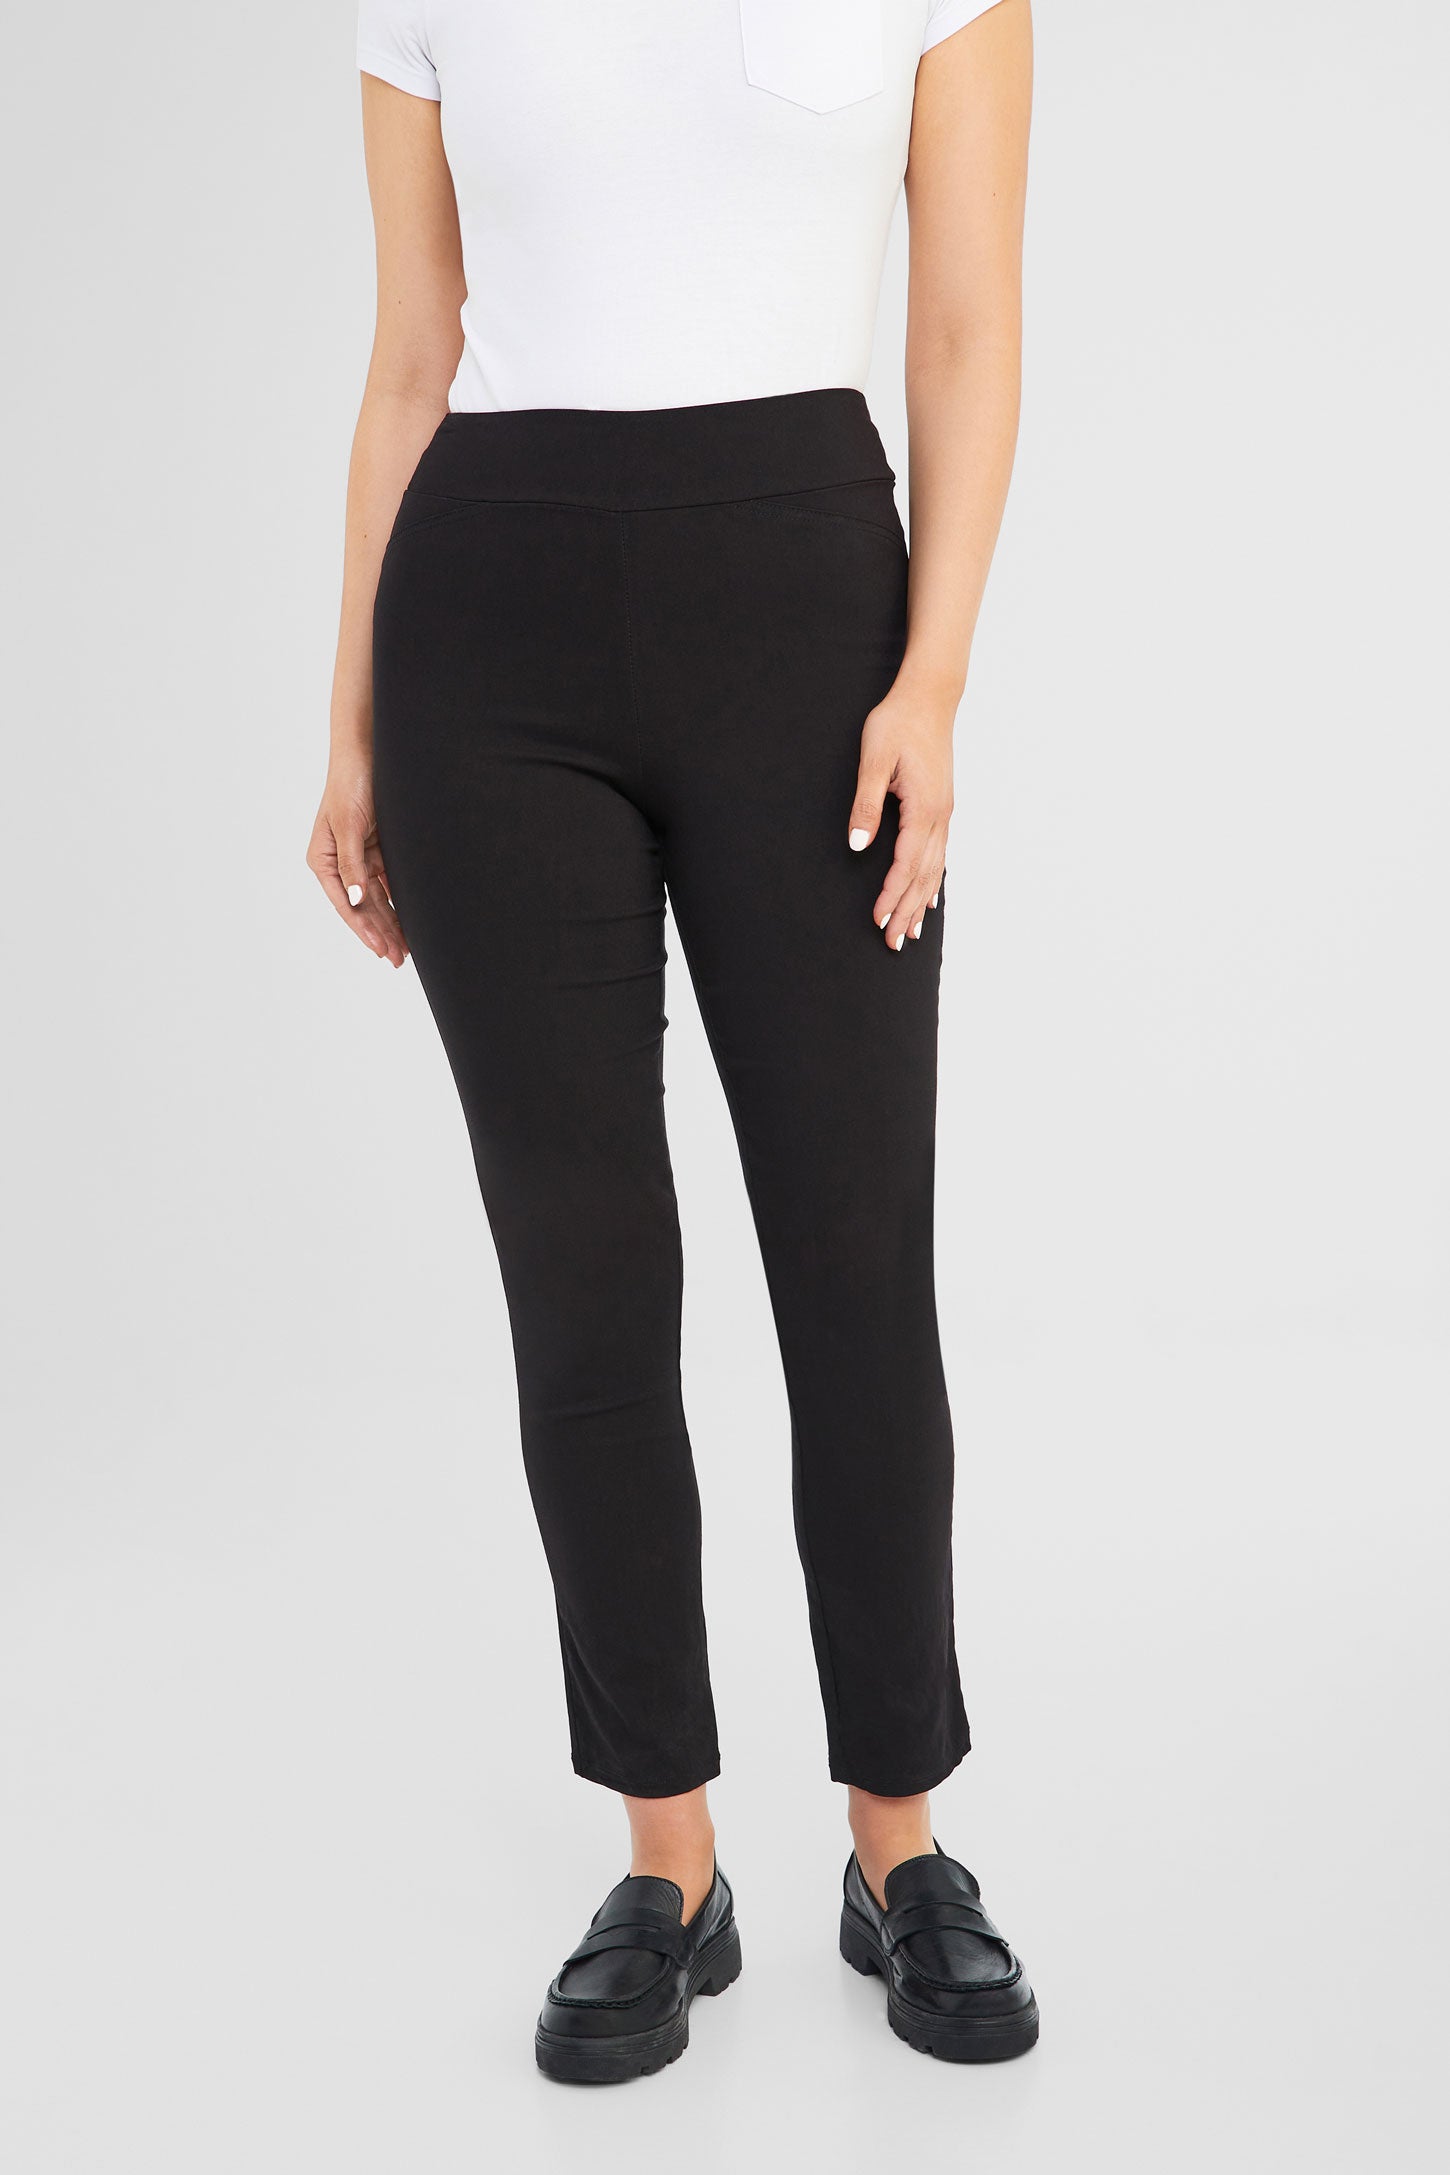 NEW! Stretch Twill Pants  NEW! NEW! NEW! These pull-on Stretch